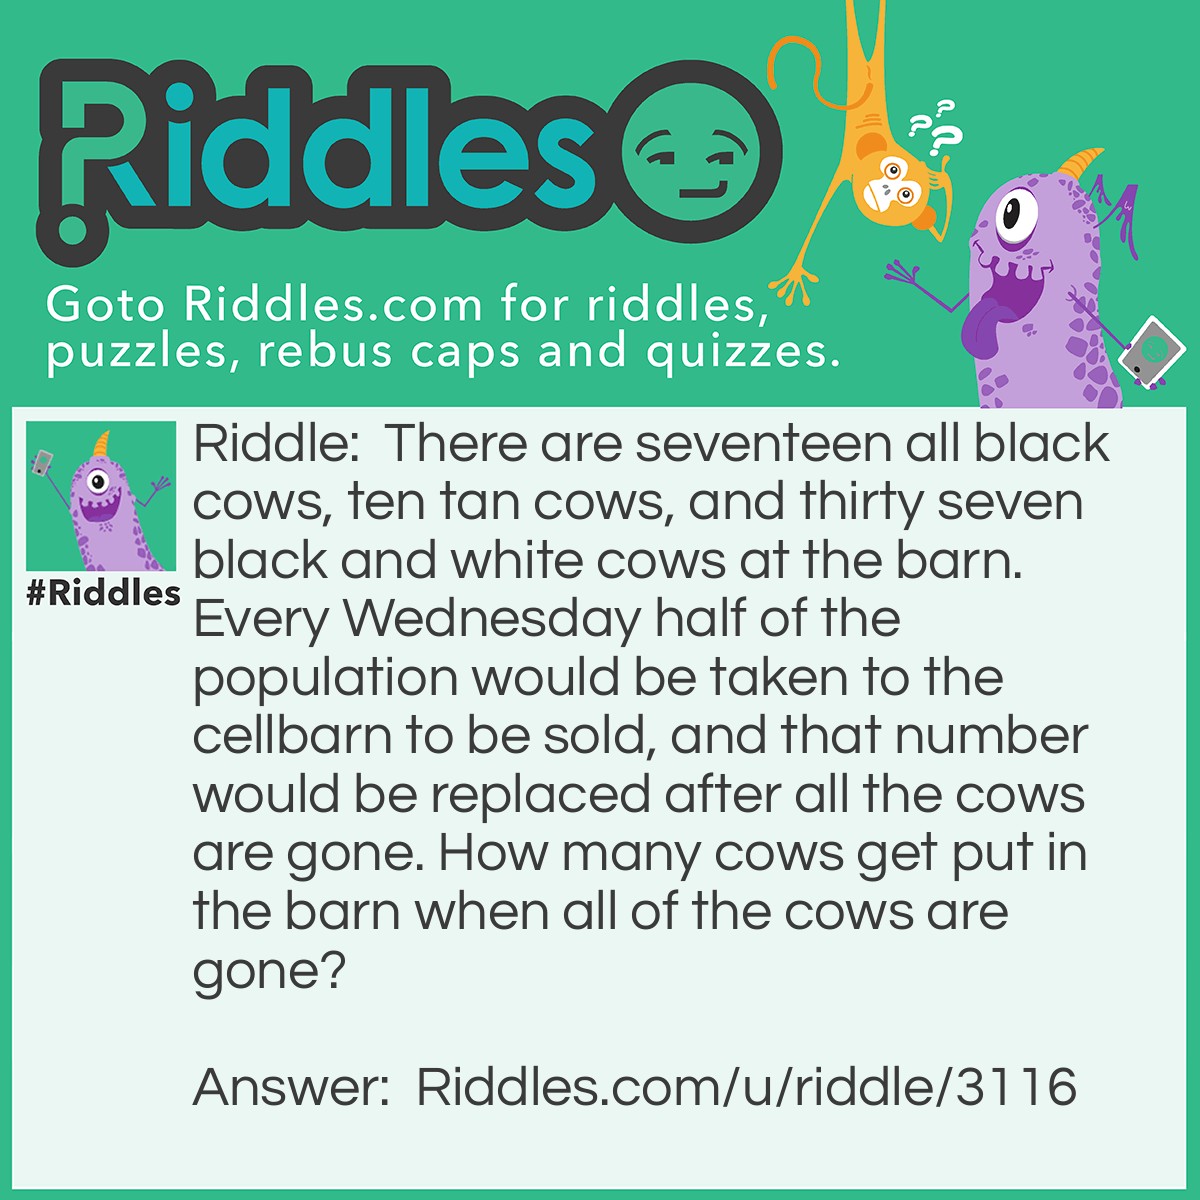 Riddle: There are seventeen all black cows, ten tan cows, and thirty seven black and white cows at the barn. Every Wednesday half of the population would be taken to the cellbarn to be sold, and that number would be replaced after all the cows are gone. How many cows get put in the barn when all of the cows are gone? Answer: None! If there are 0 cows left, 0 cows will be replaced!